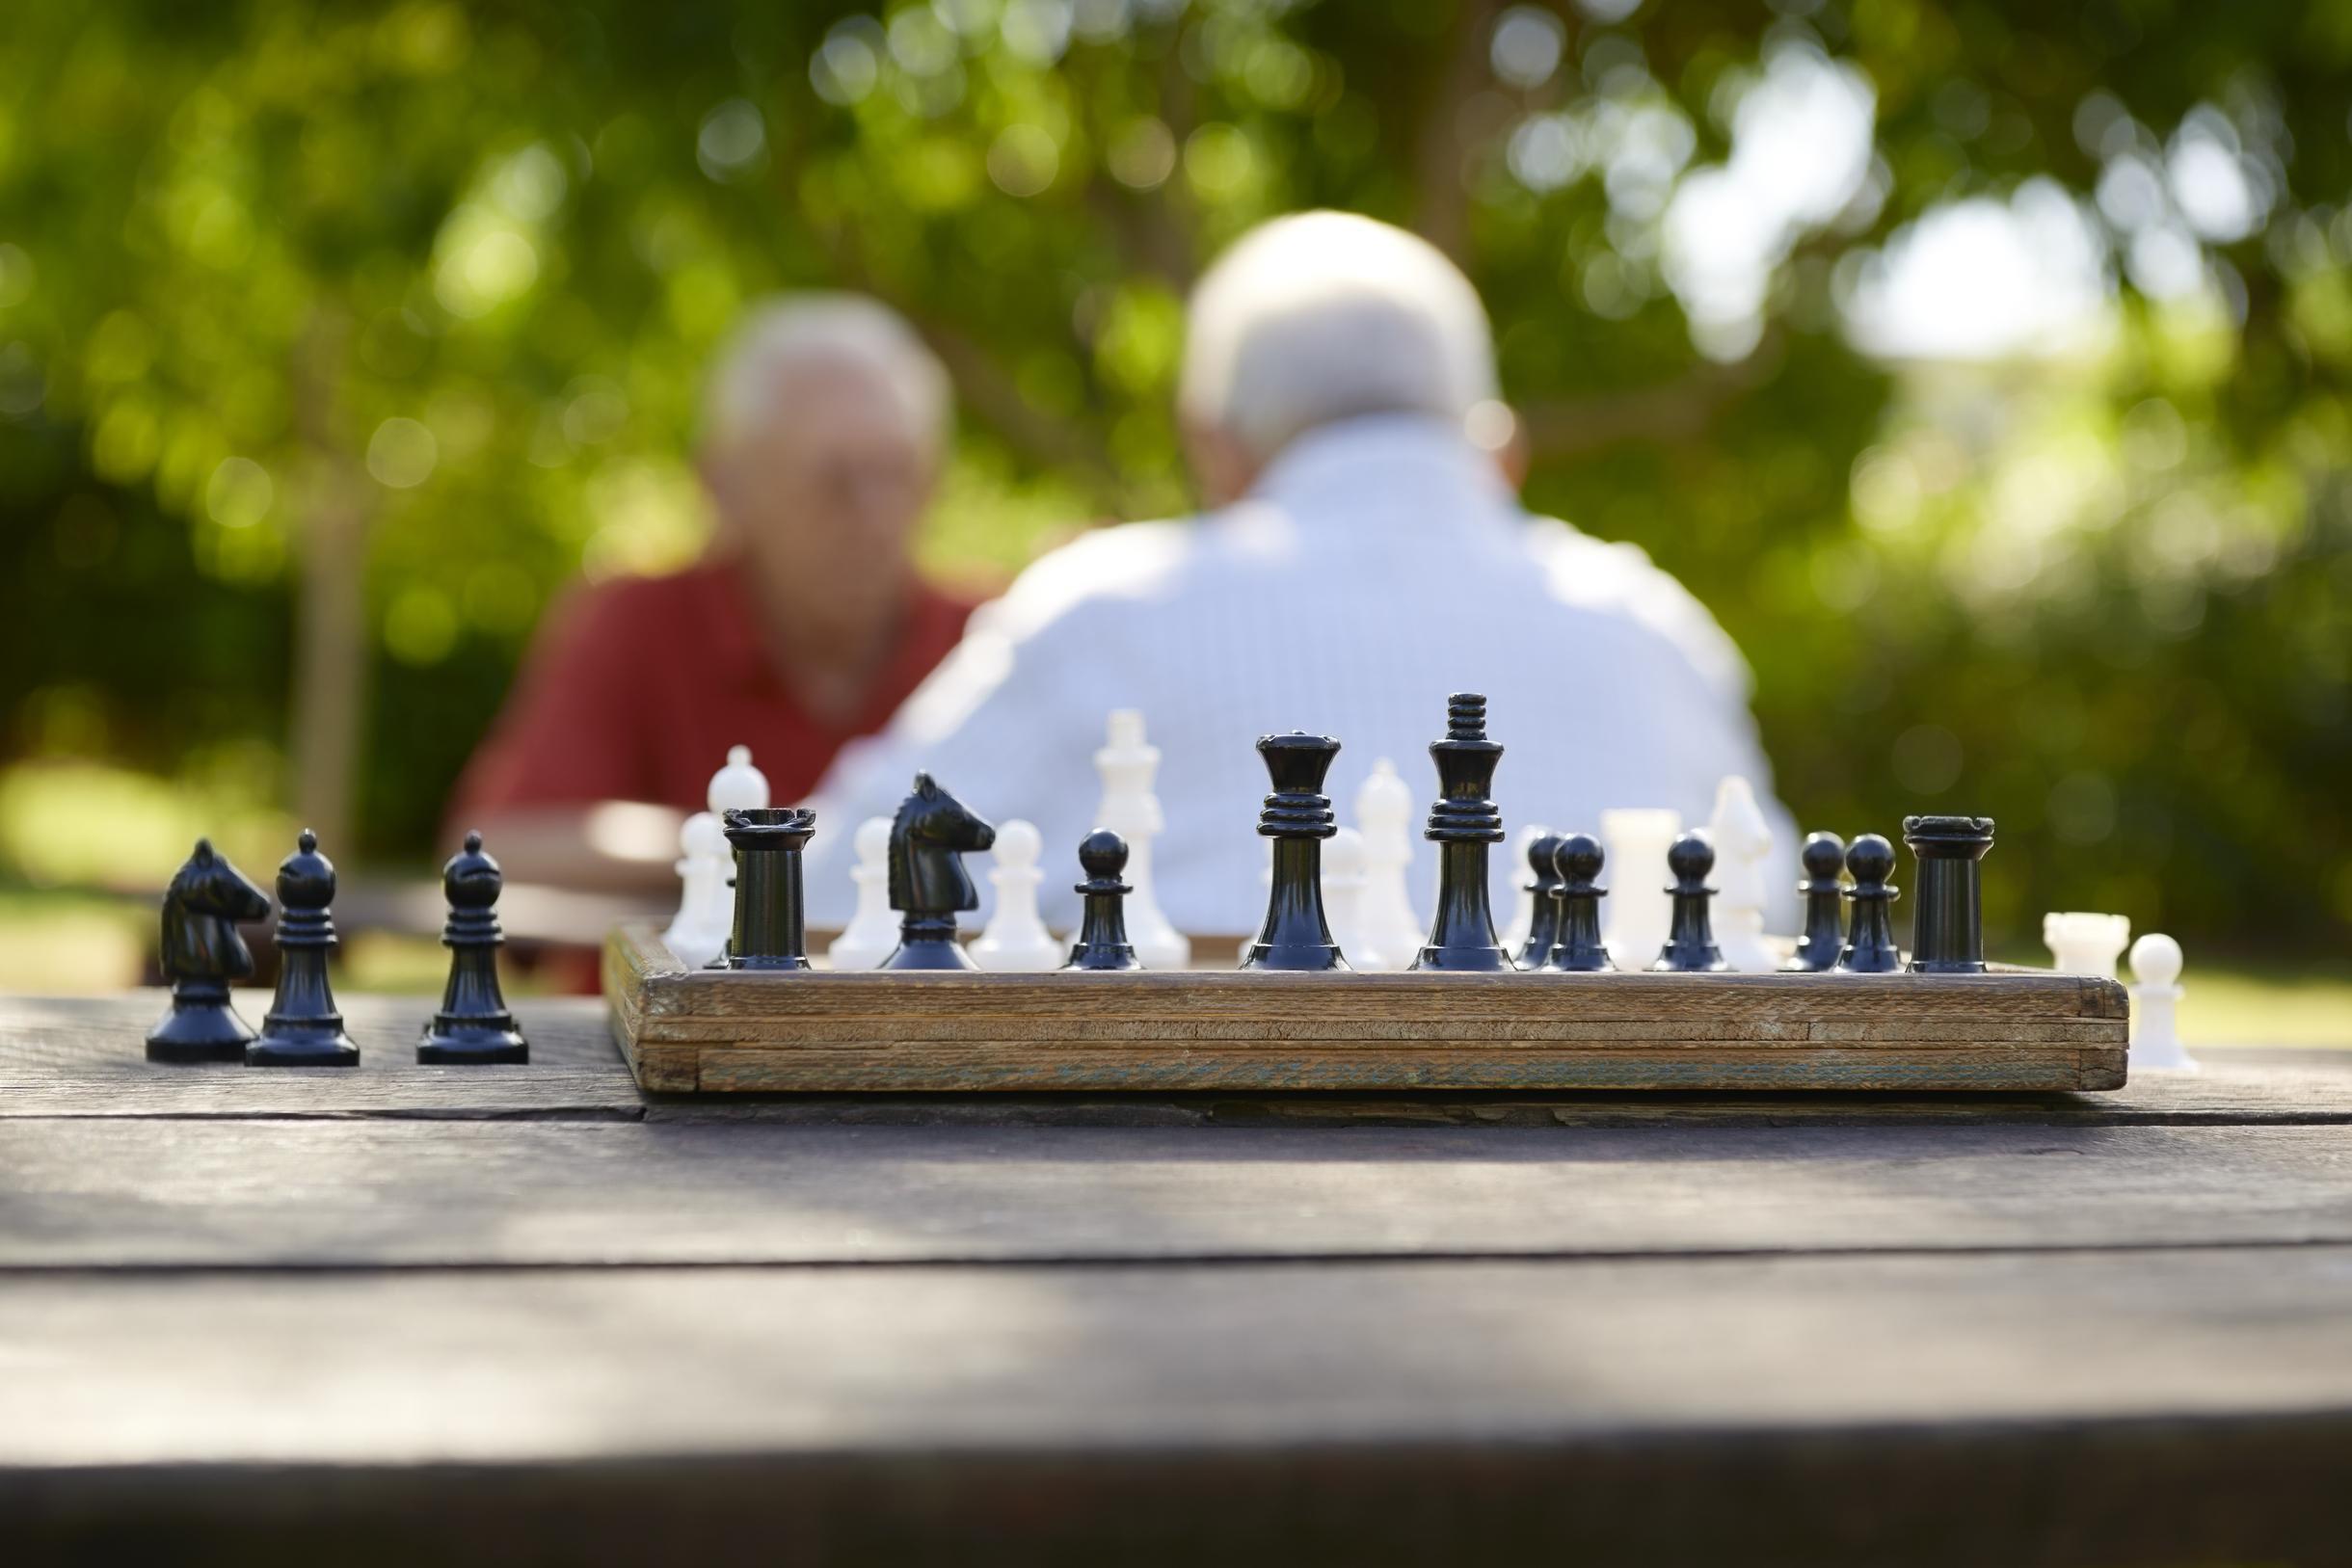 Two friends playing chess in the park